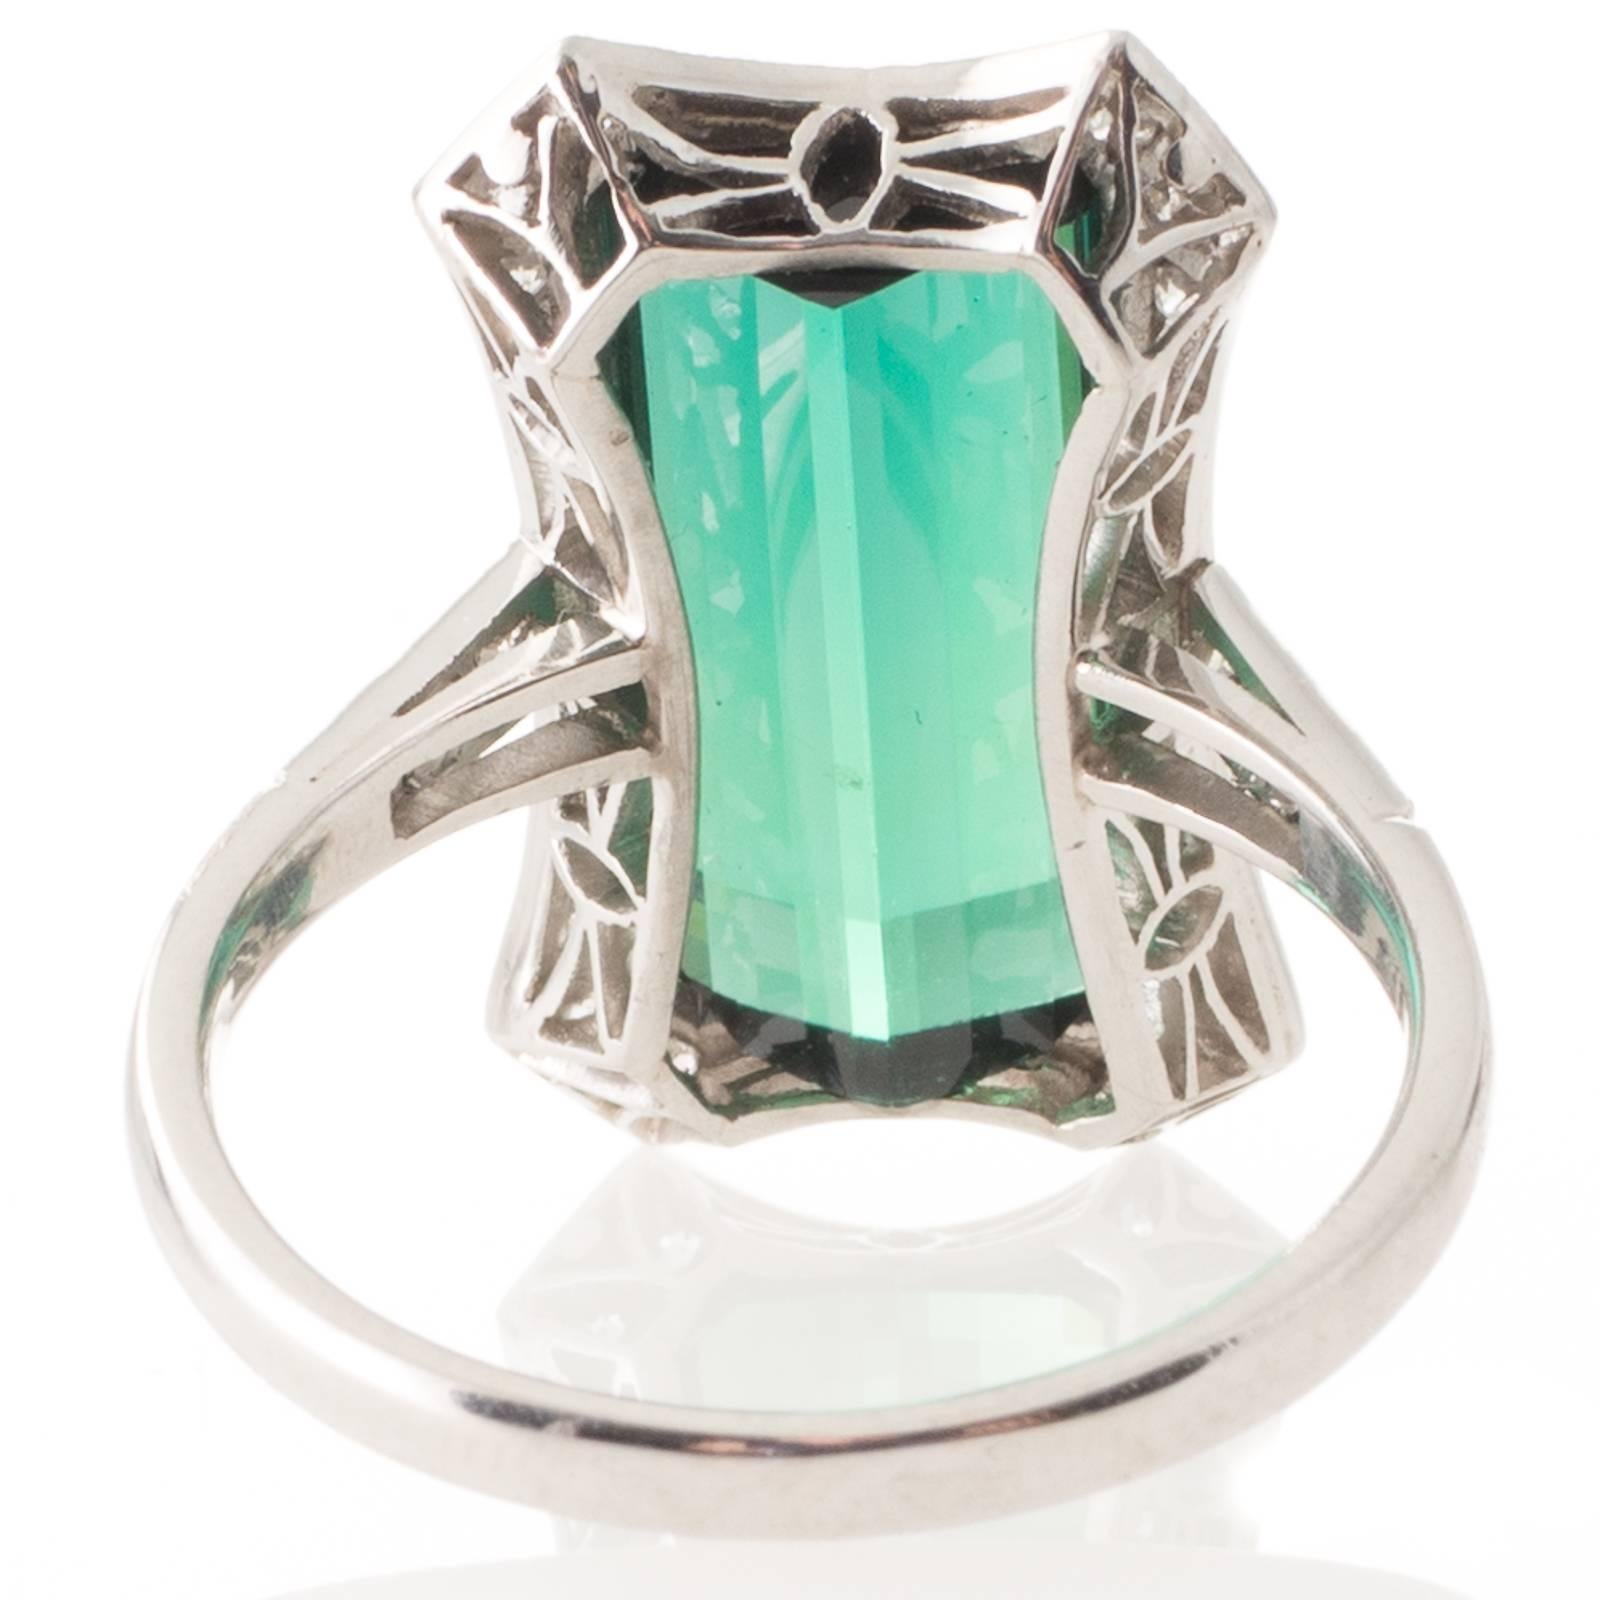 An 18ct white gold  ring, bezel set with a rectangular cut green tourmaline of 7.09ct, in a frame of twelve grain set early brilliant cut diamonds above a pierced gallery to upswept grain set diamond shoulders and a plain polished band. 
Total